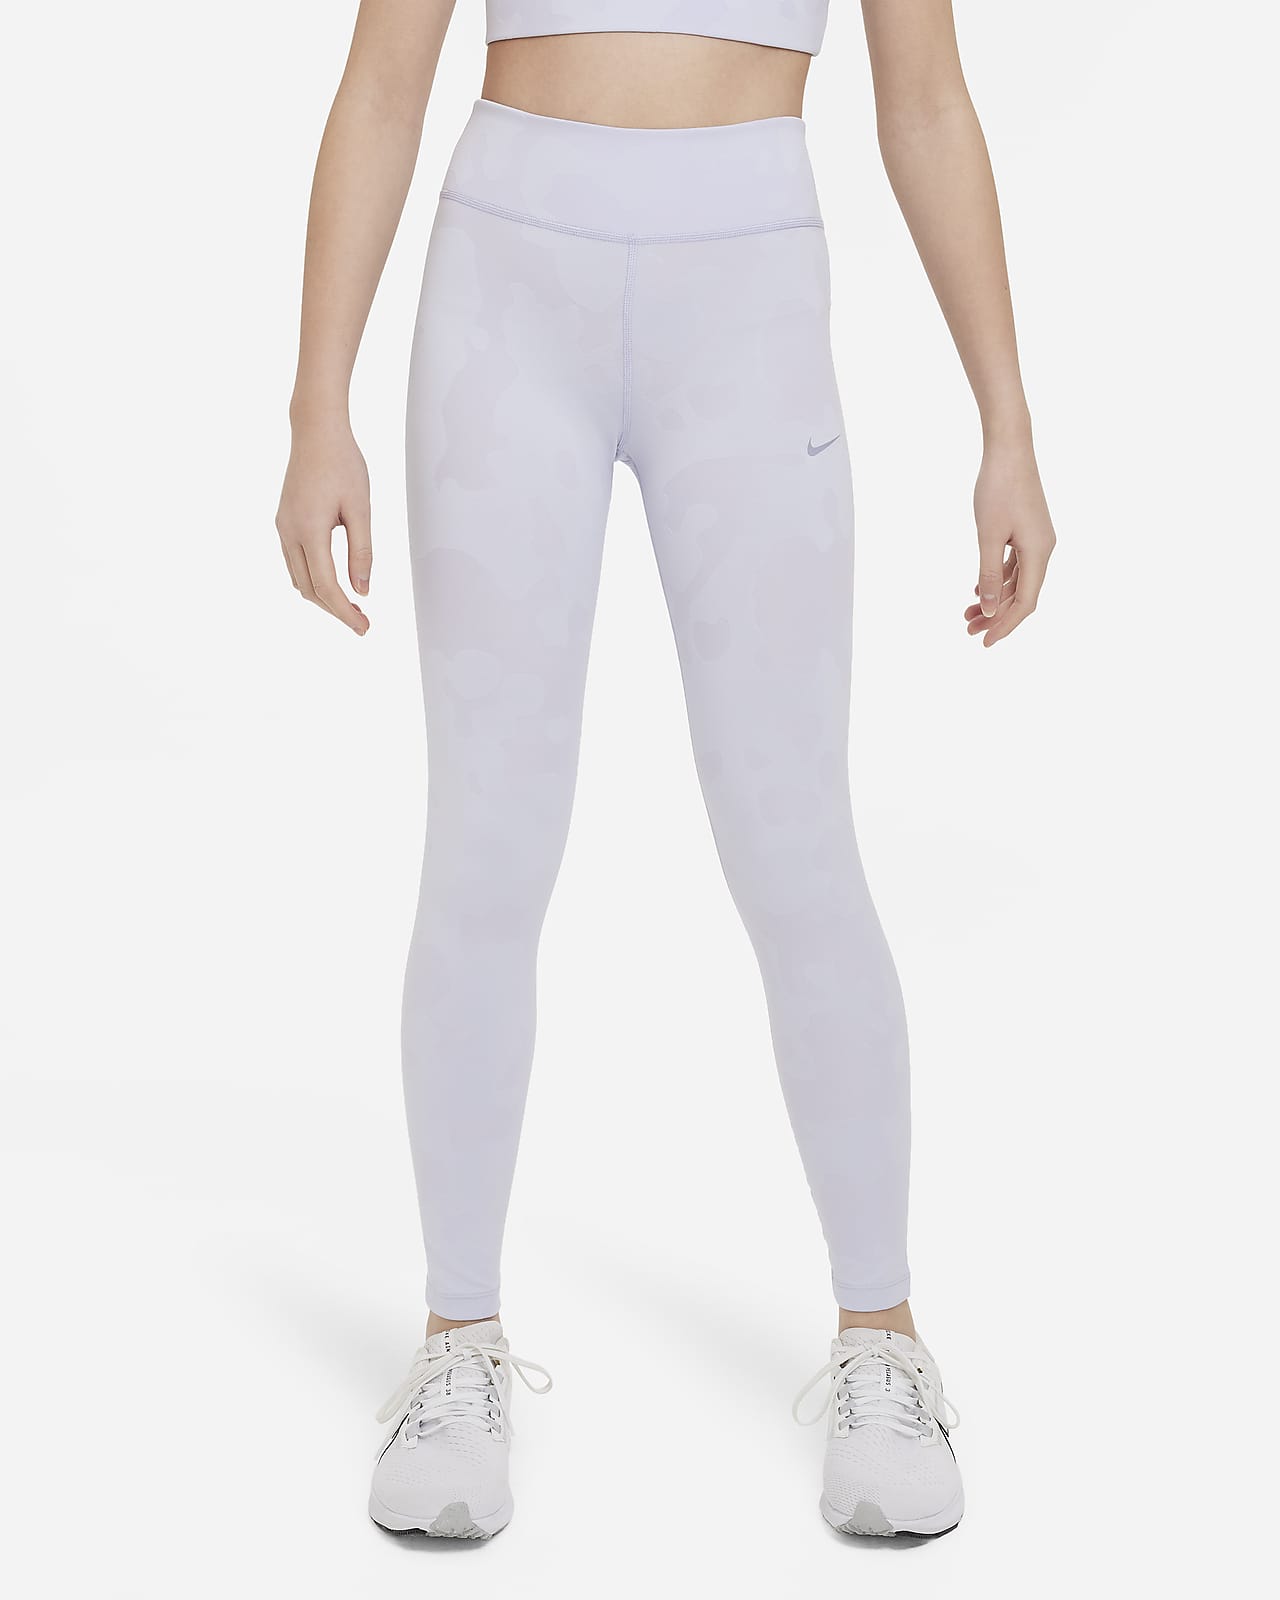 Buy Nike Women's Synthetic No Style Name Leggings  (CT5189-021_Multicolor_X-Small) at Amazon.in